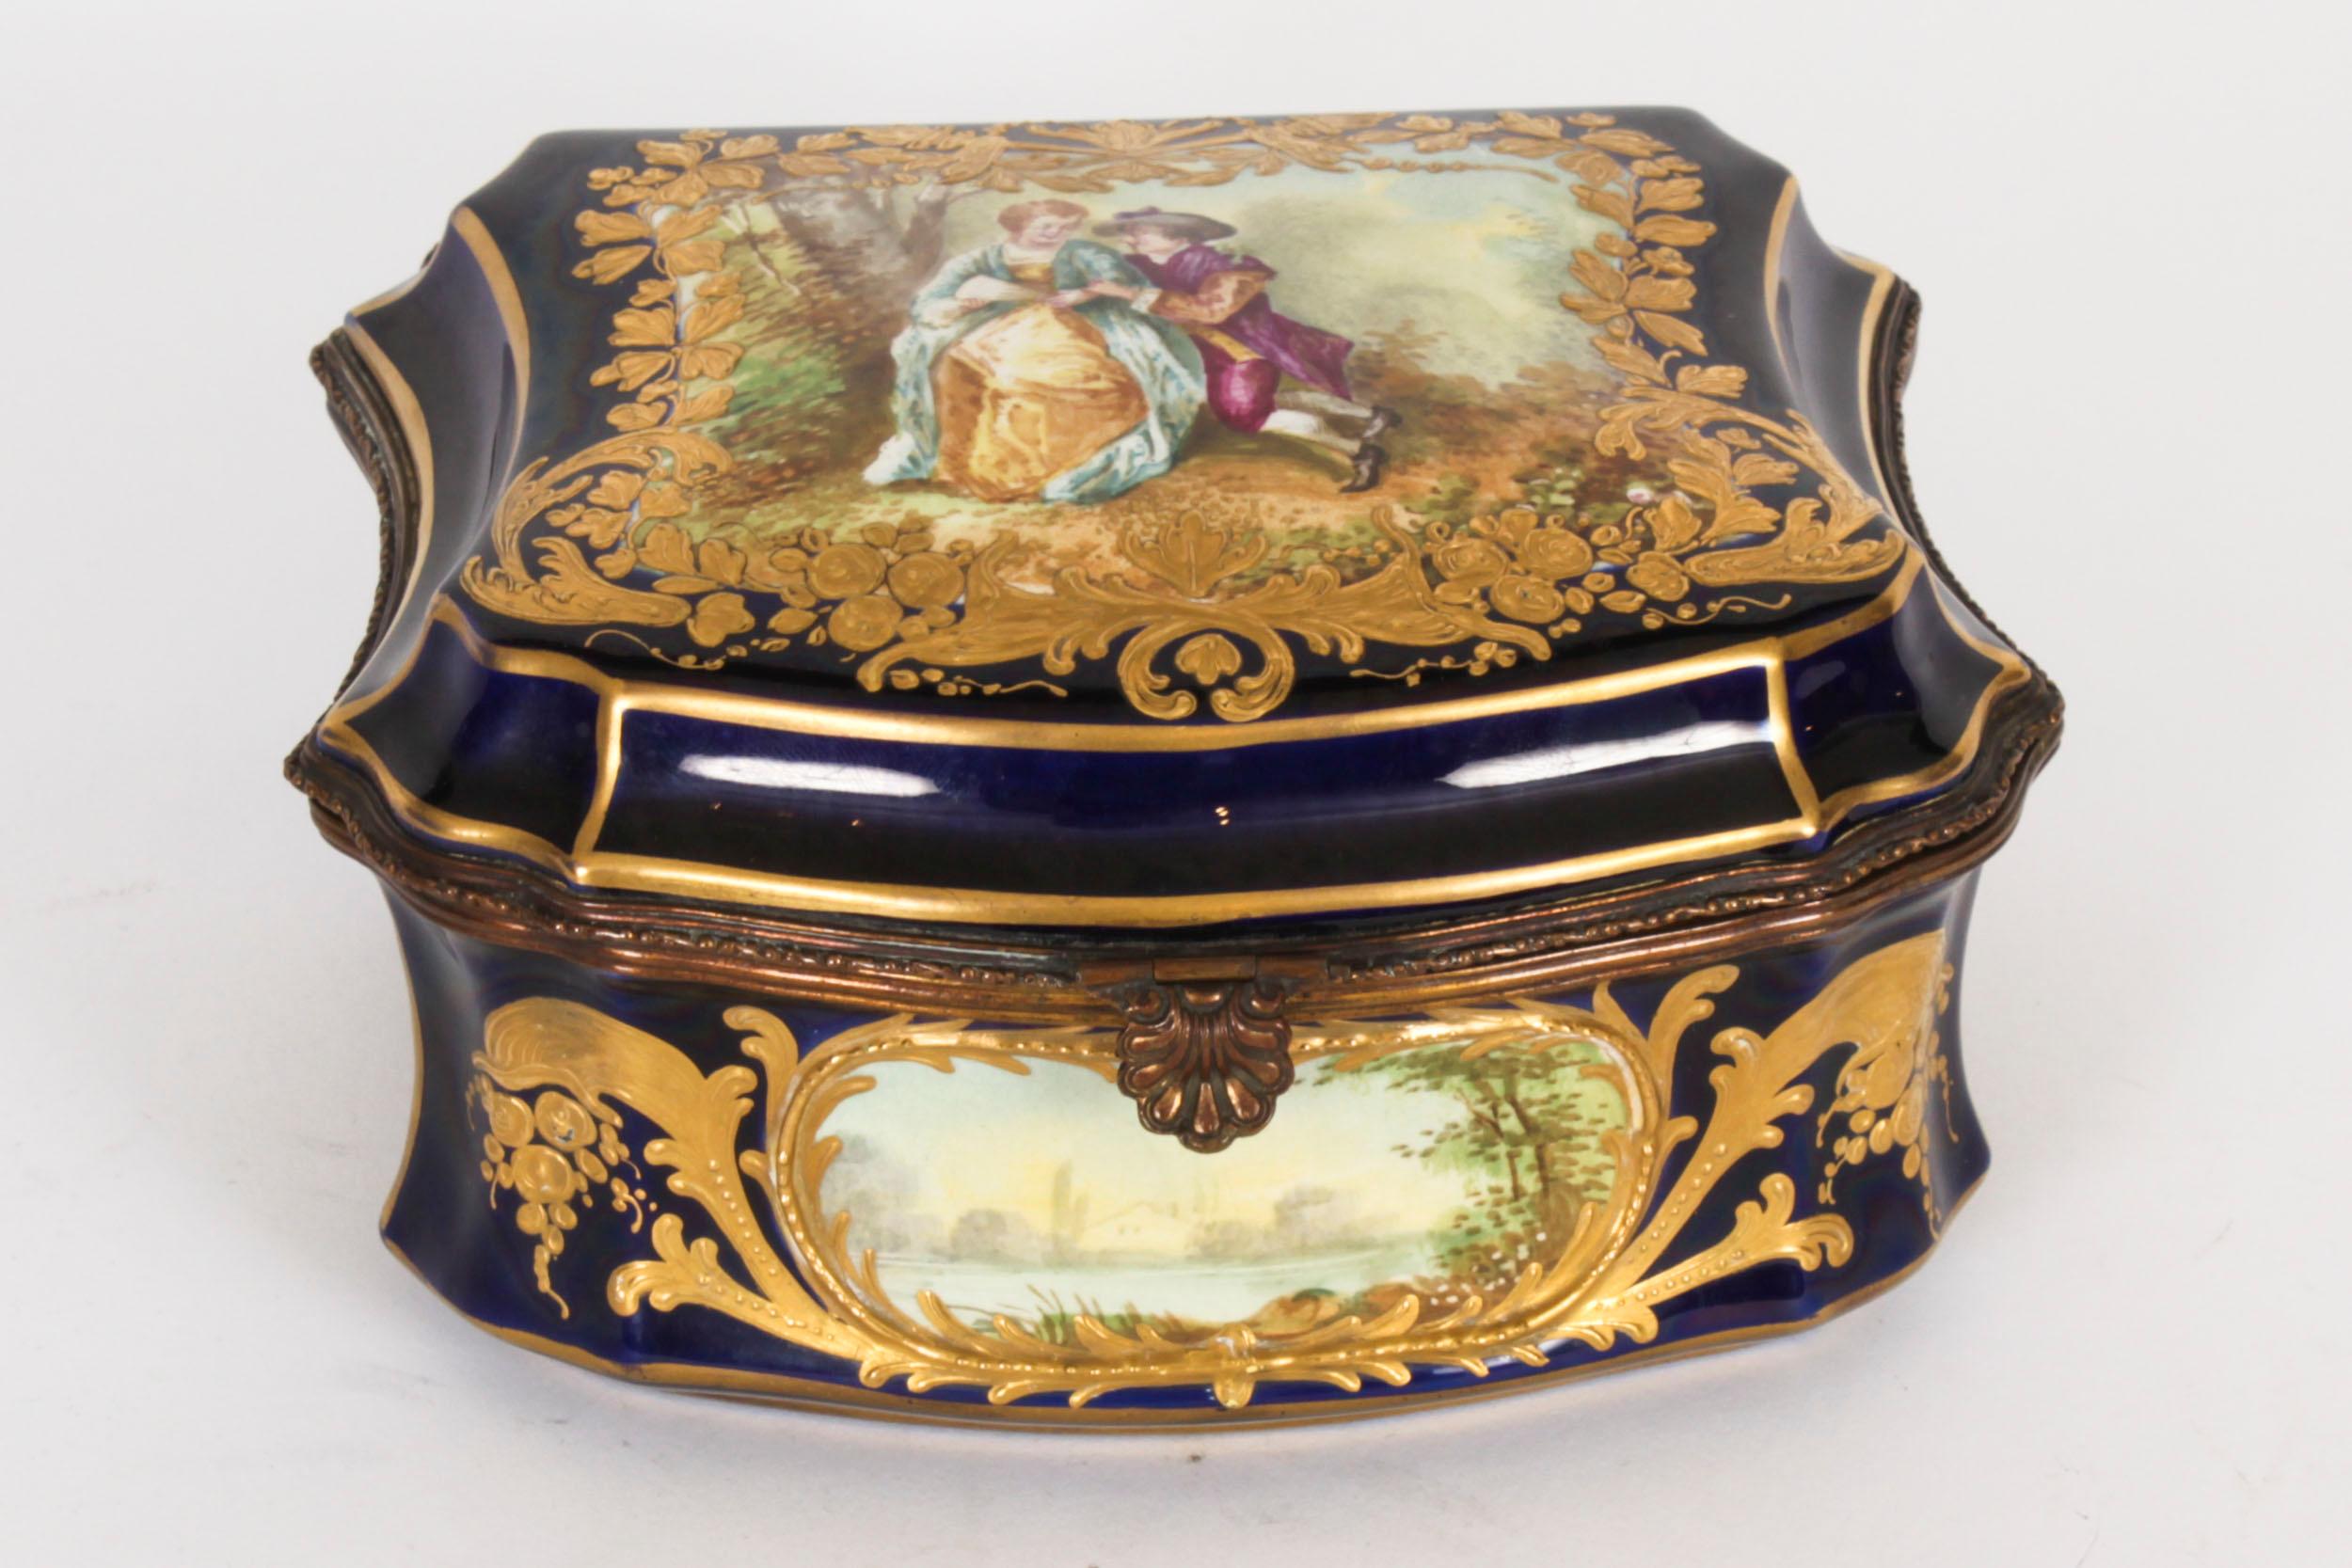 Antique French Sevres Cobalt Blue Porcelain Jewellery Casket 19th Century  In Good Condition For Sale In London, GB